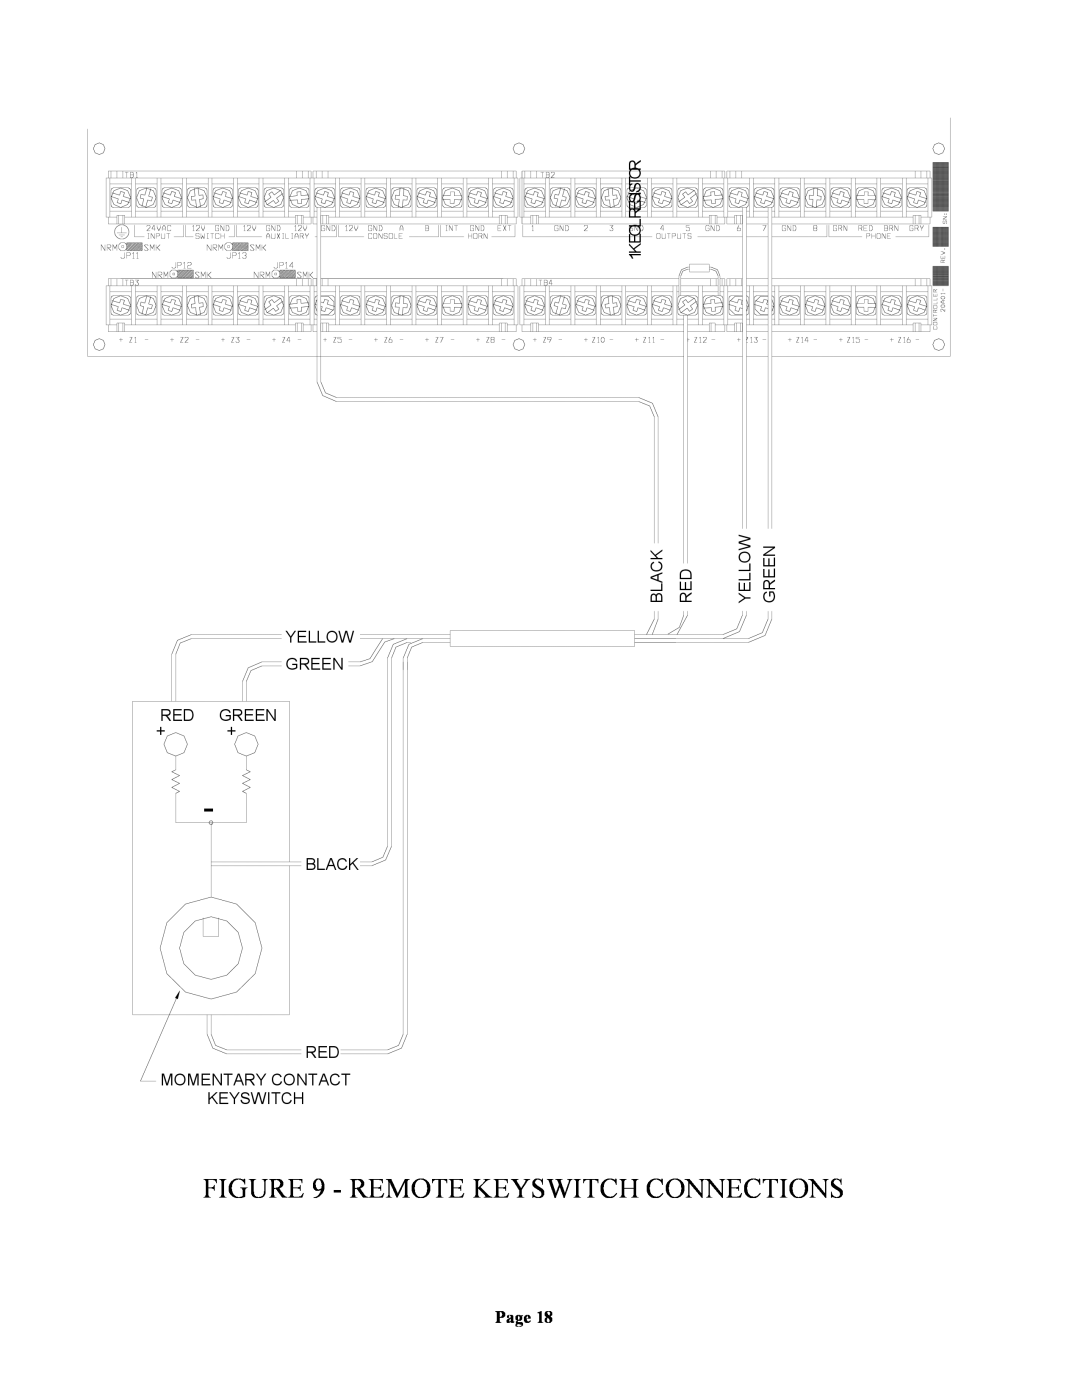 Home Automation 20A00-1 installation manual Remote Keyswitch Connections, Page, 1KEOLRESISTOR, Black Red, Yellow Green 